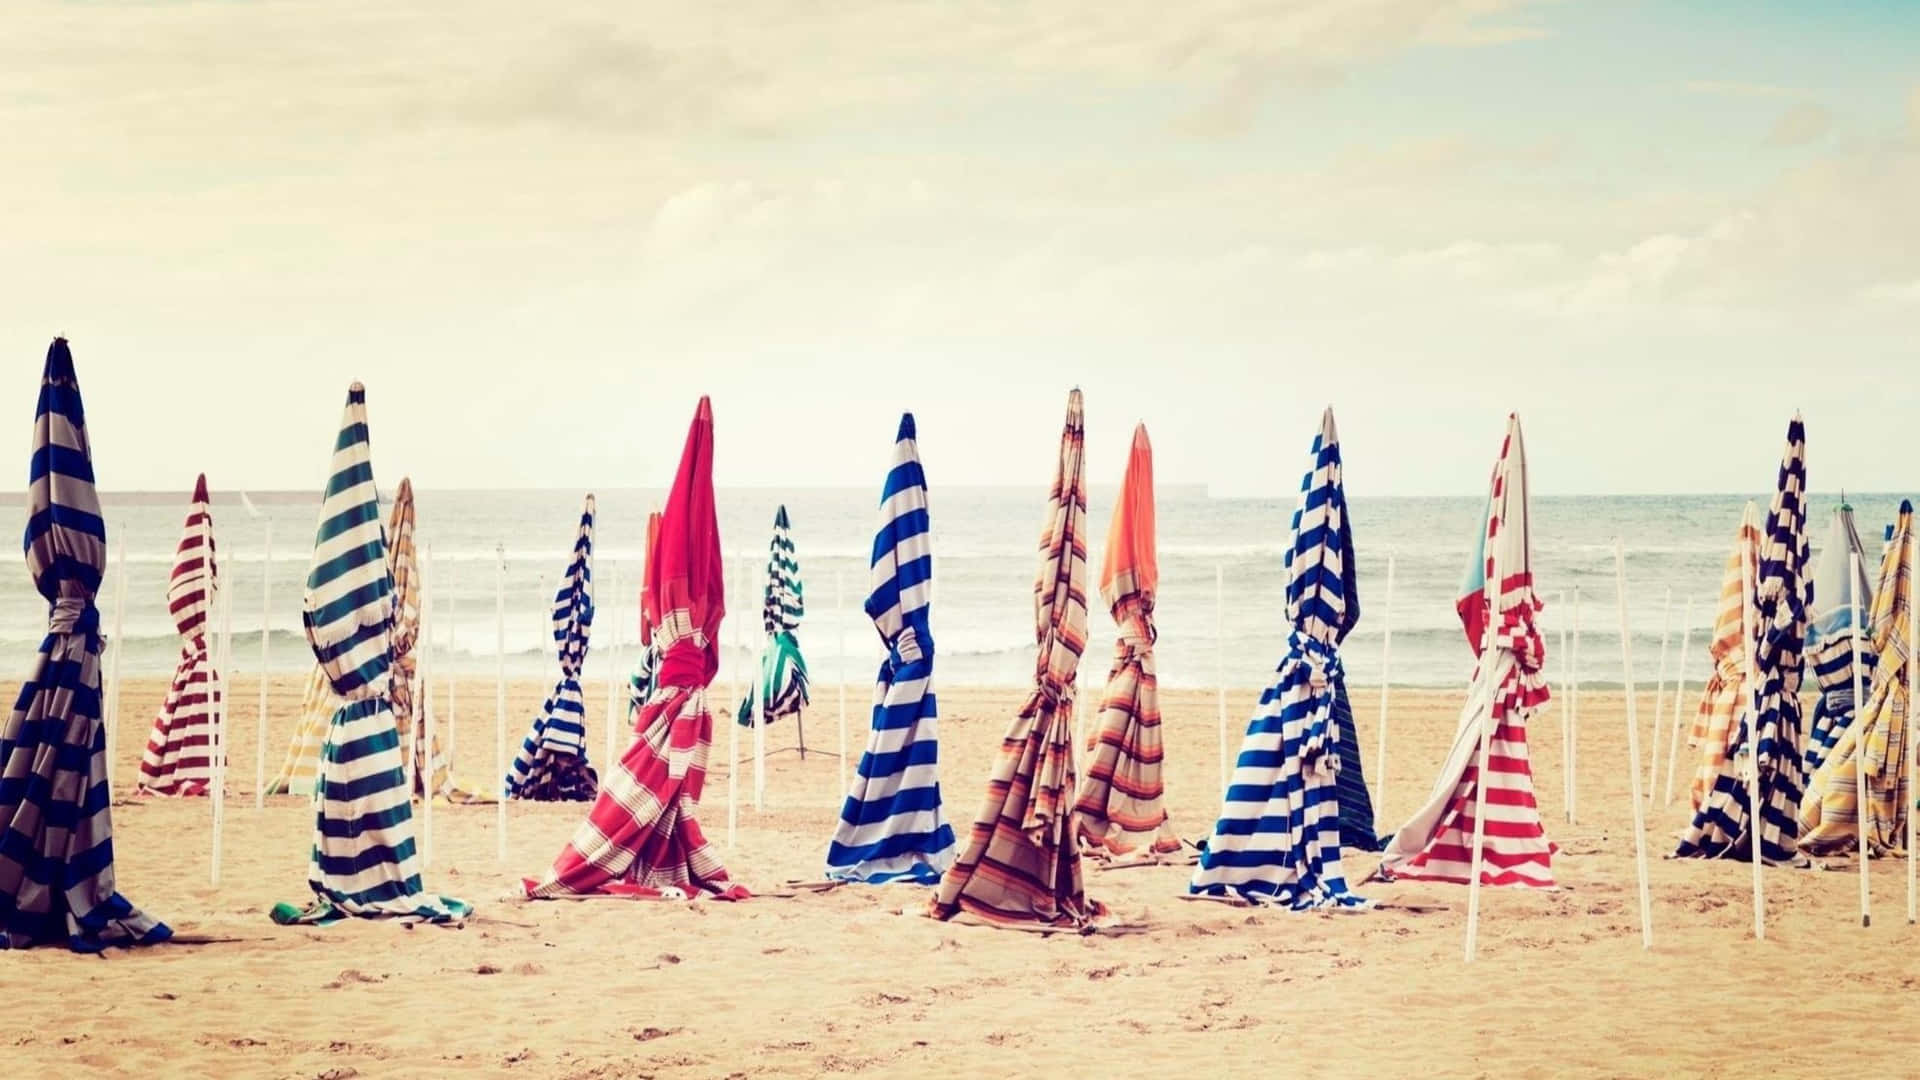 A Group Of Umbrellas On The Beach